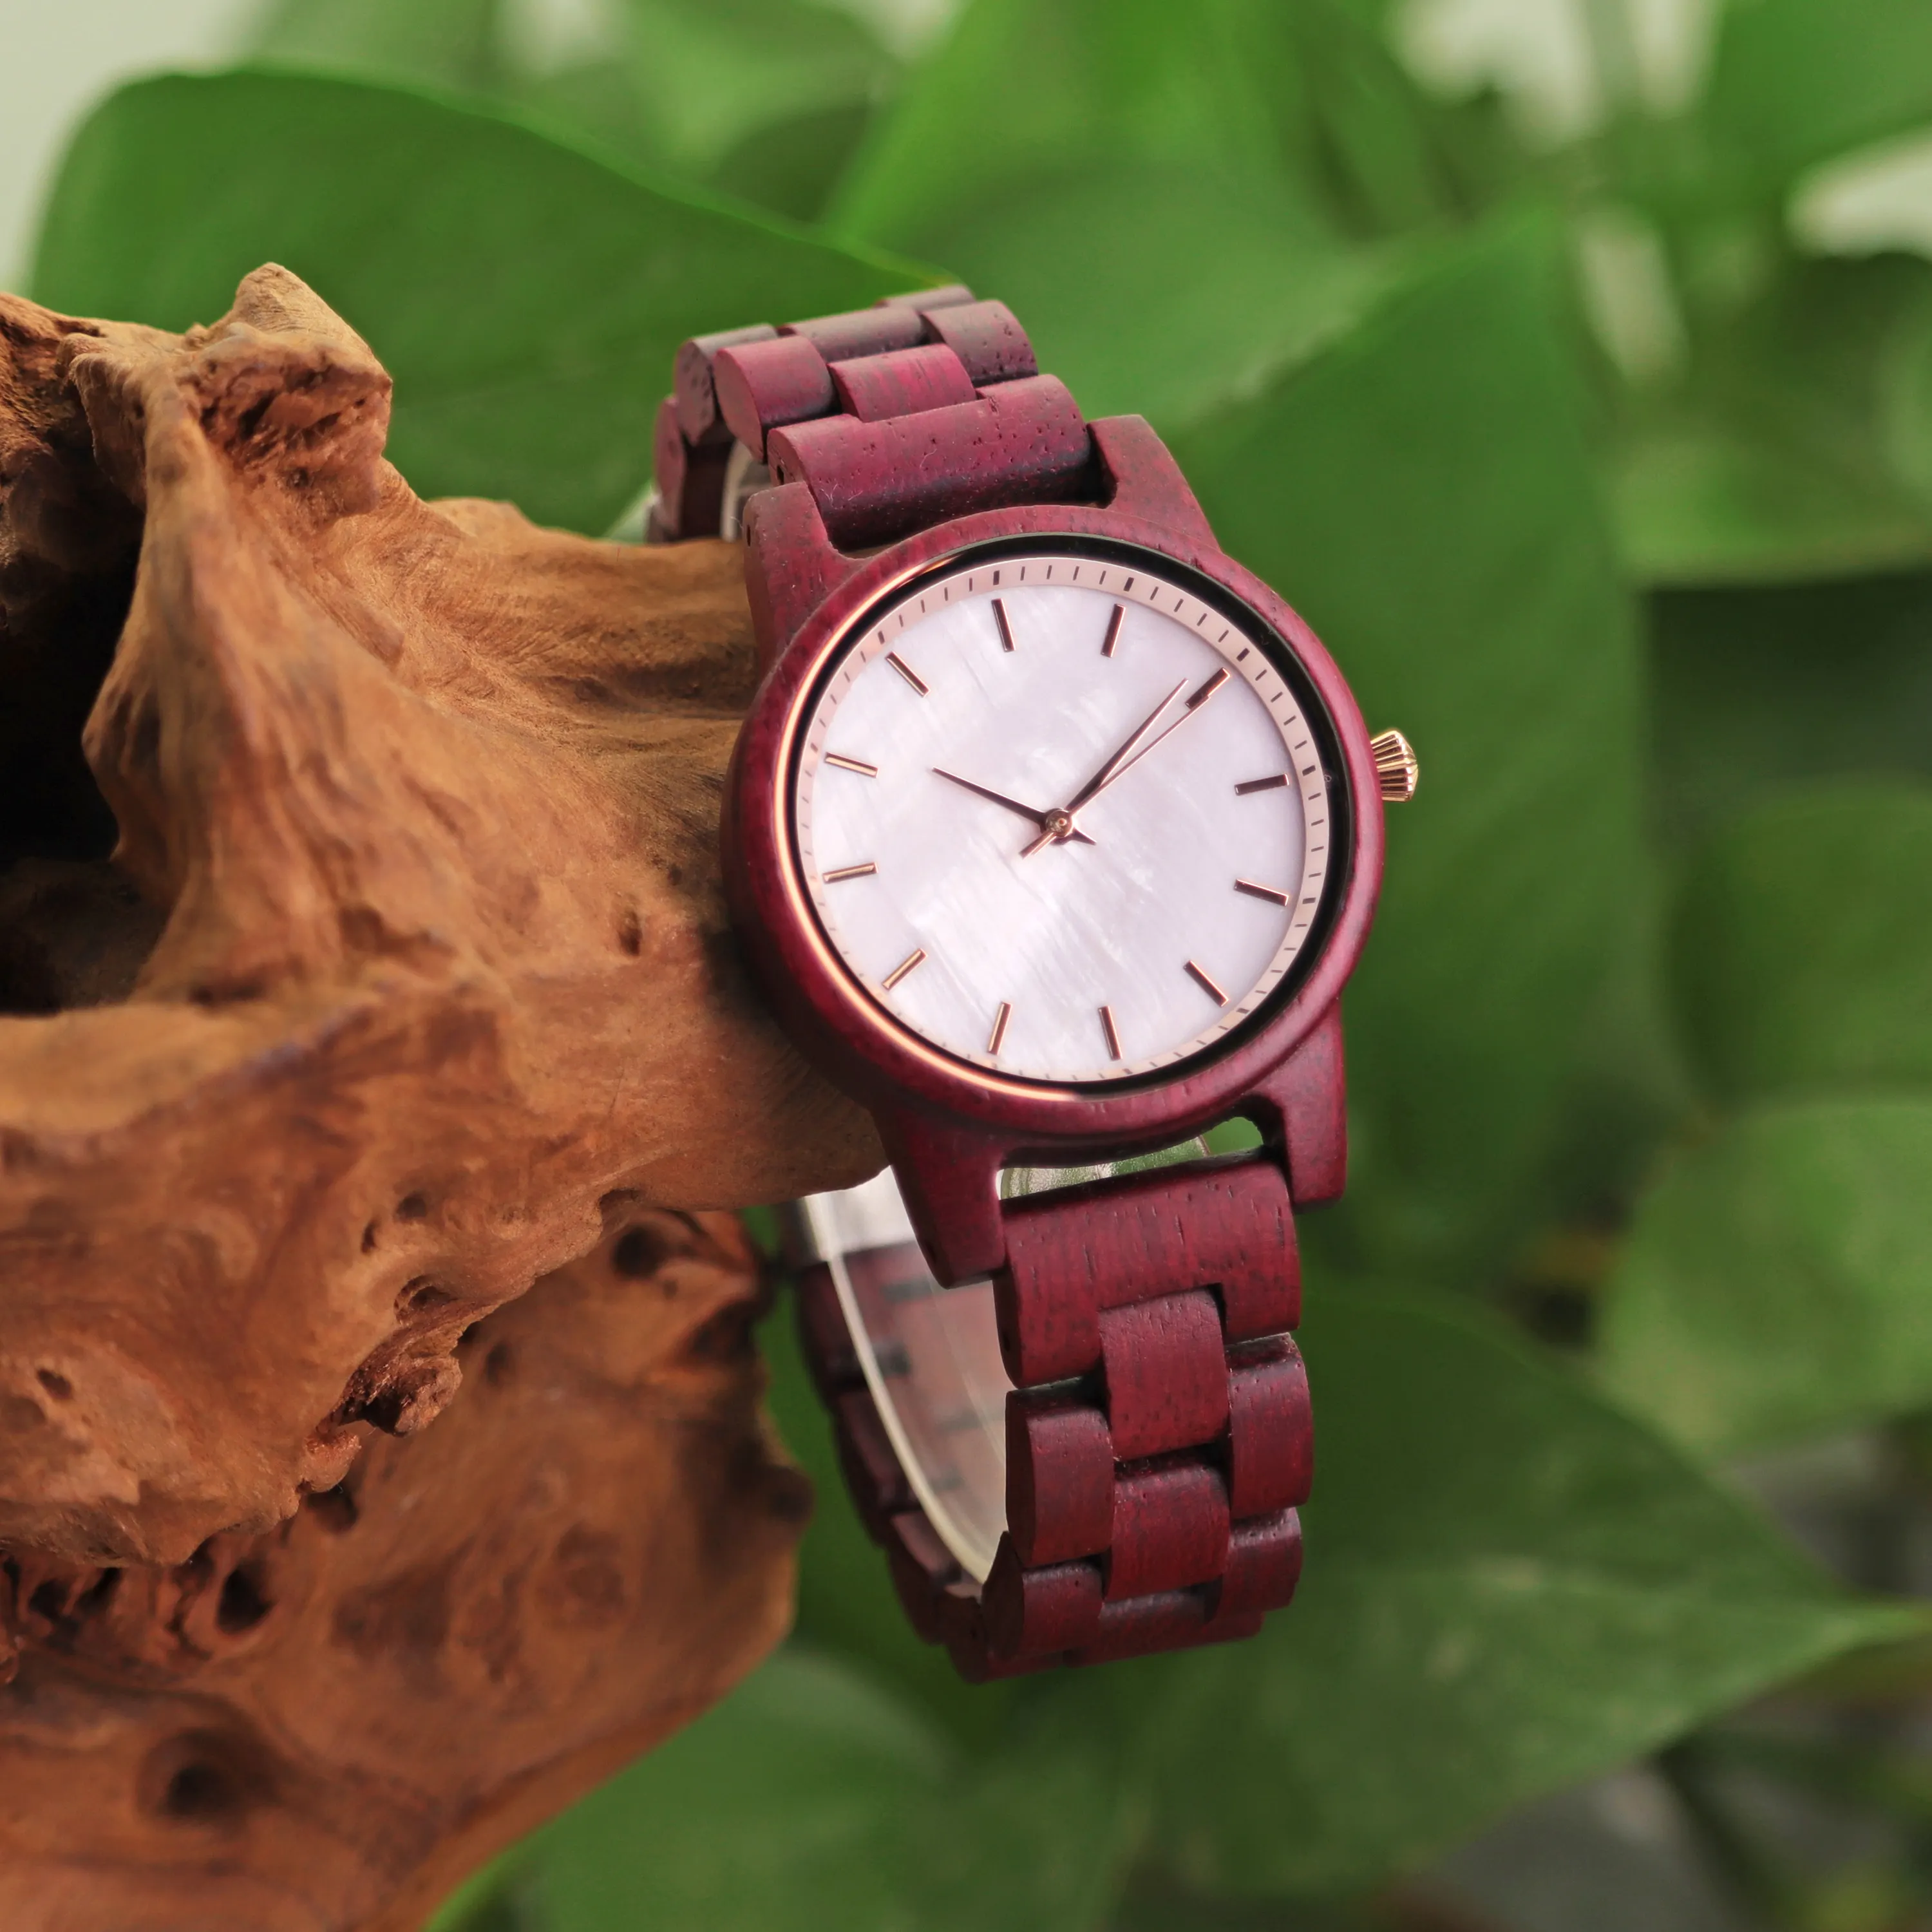 Relogio Masculino Wood Watch Women Top Luxury Brand Wrist Watches Famale Great Gifts for Her OEM